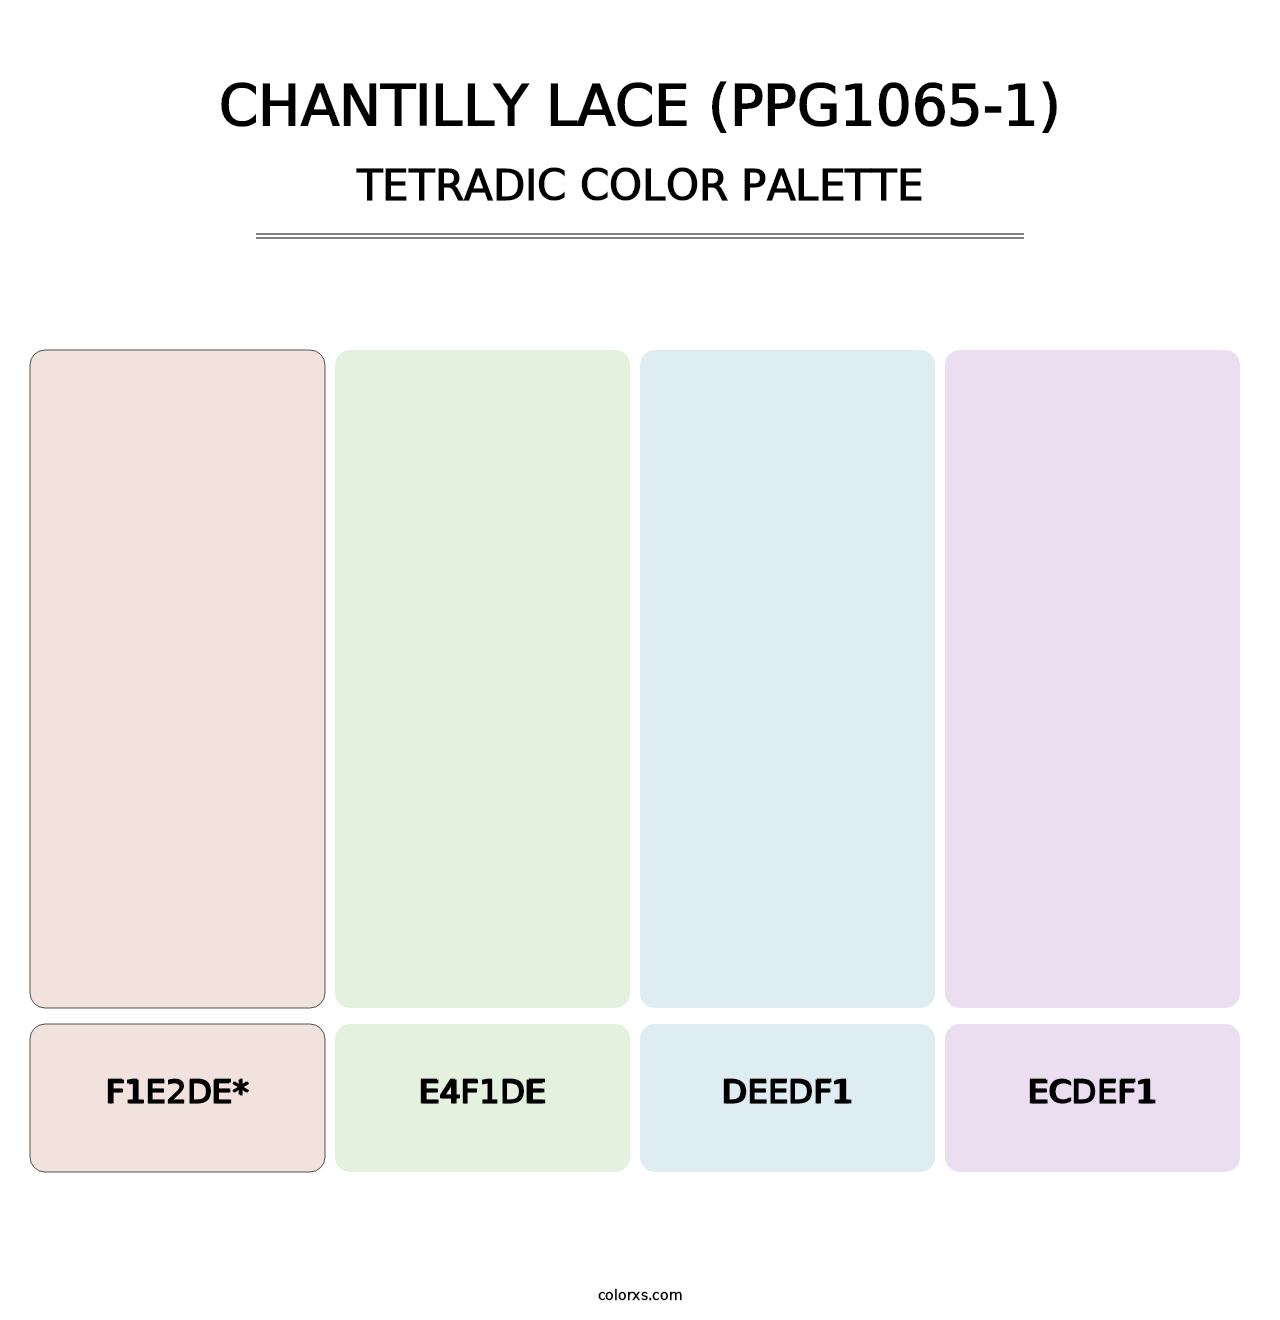 Chantilly Lace (PPG1065-1) - Tetradic Color Palette